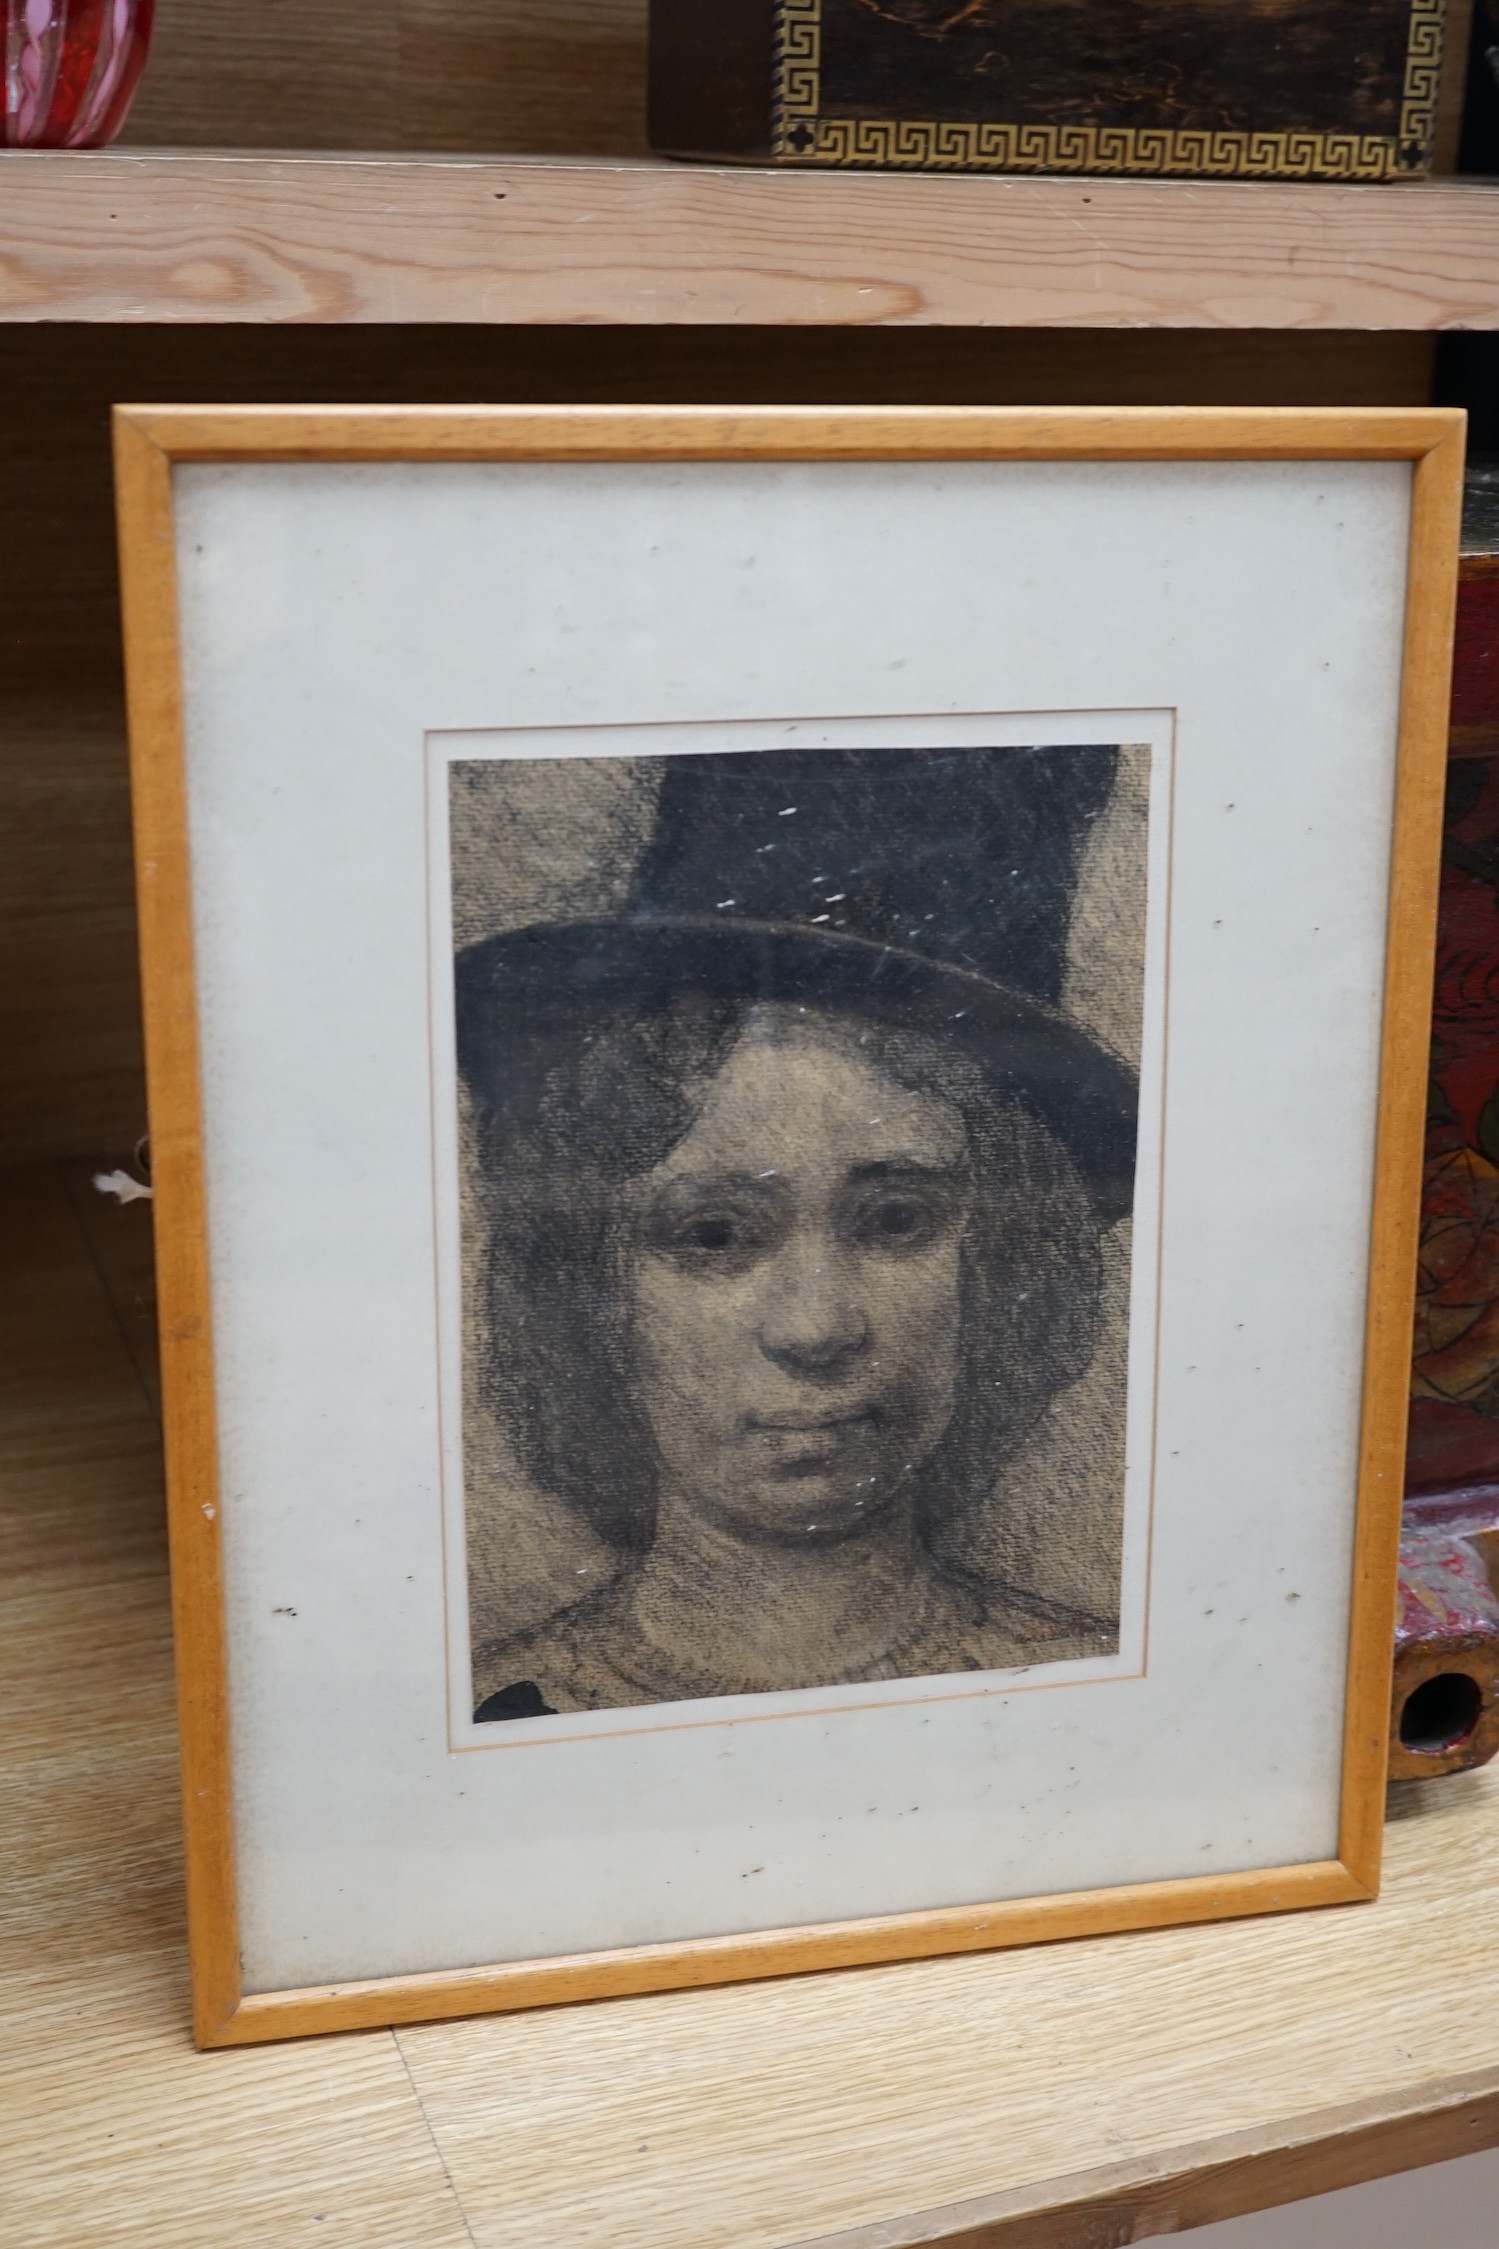 Ian Wells, charcoal drawing, ‘The Top Hat’, signed and indistinctly dated 1971?, 26 x 18cm. Condition - fair to good, paper browned